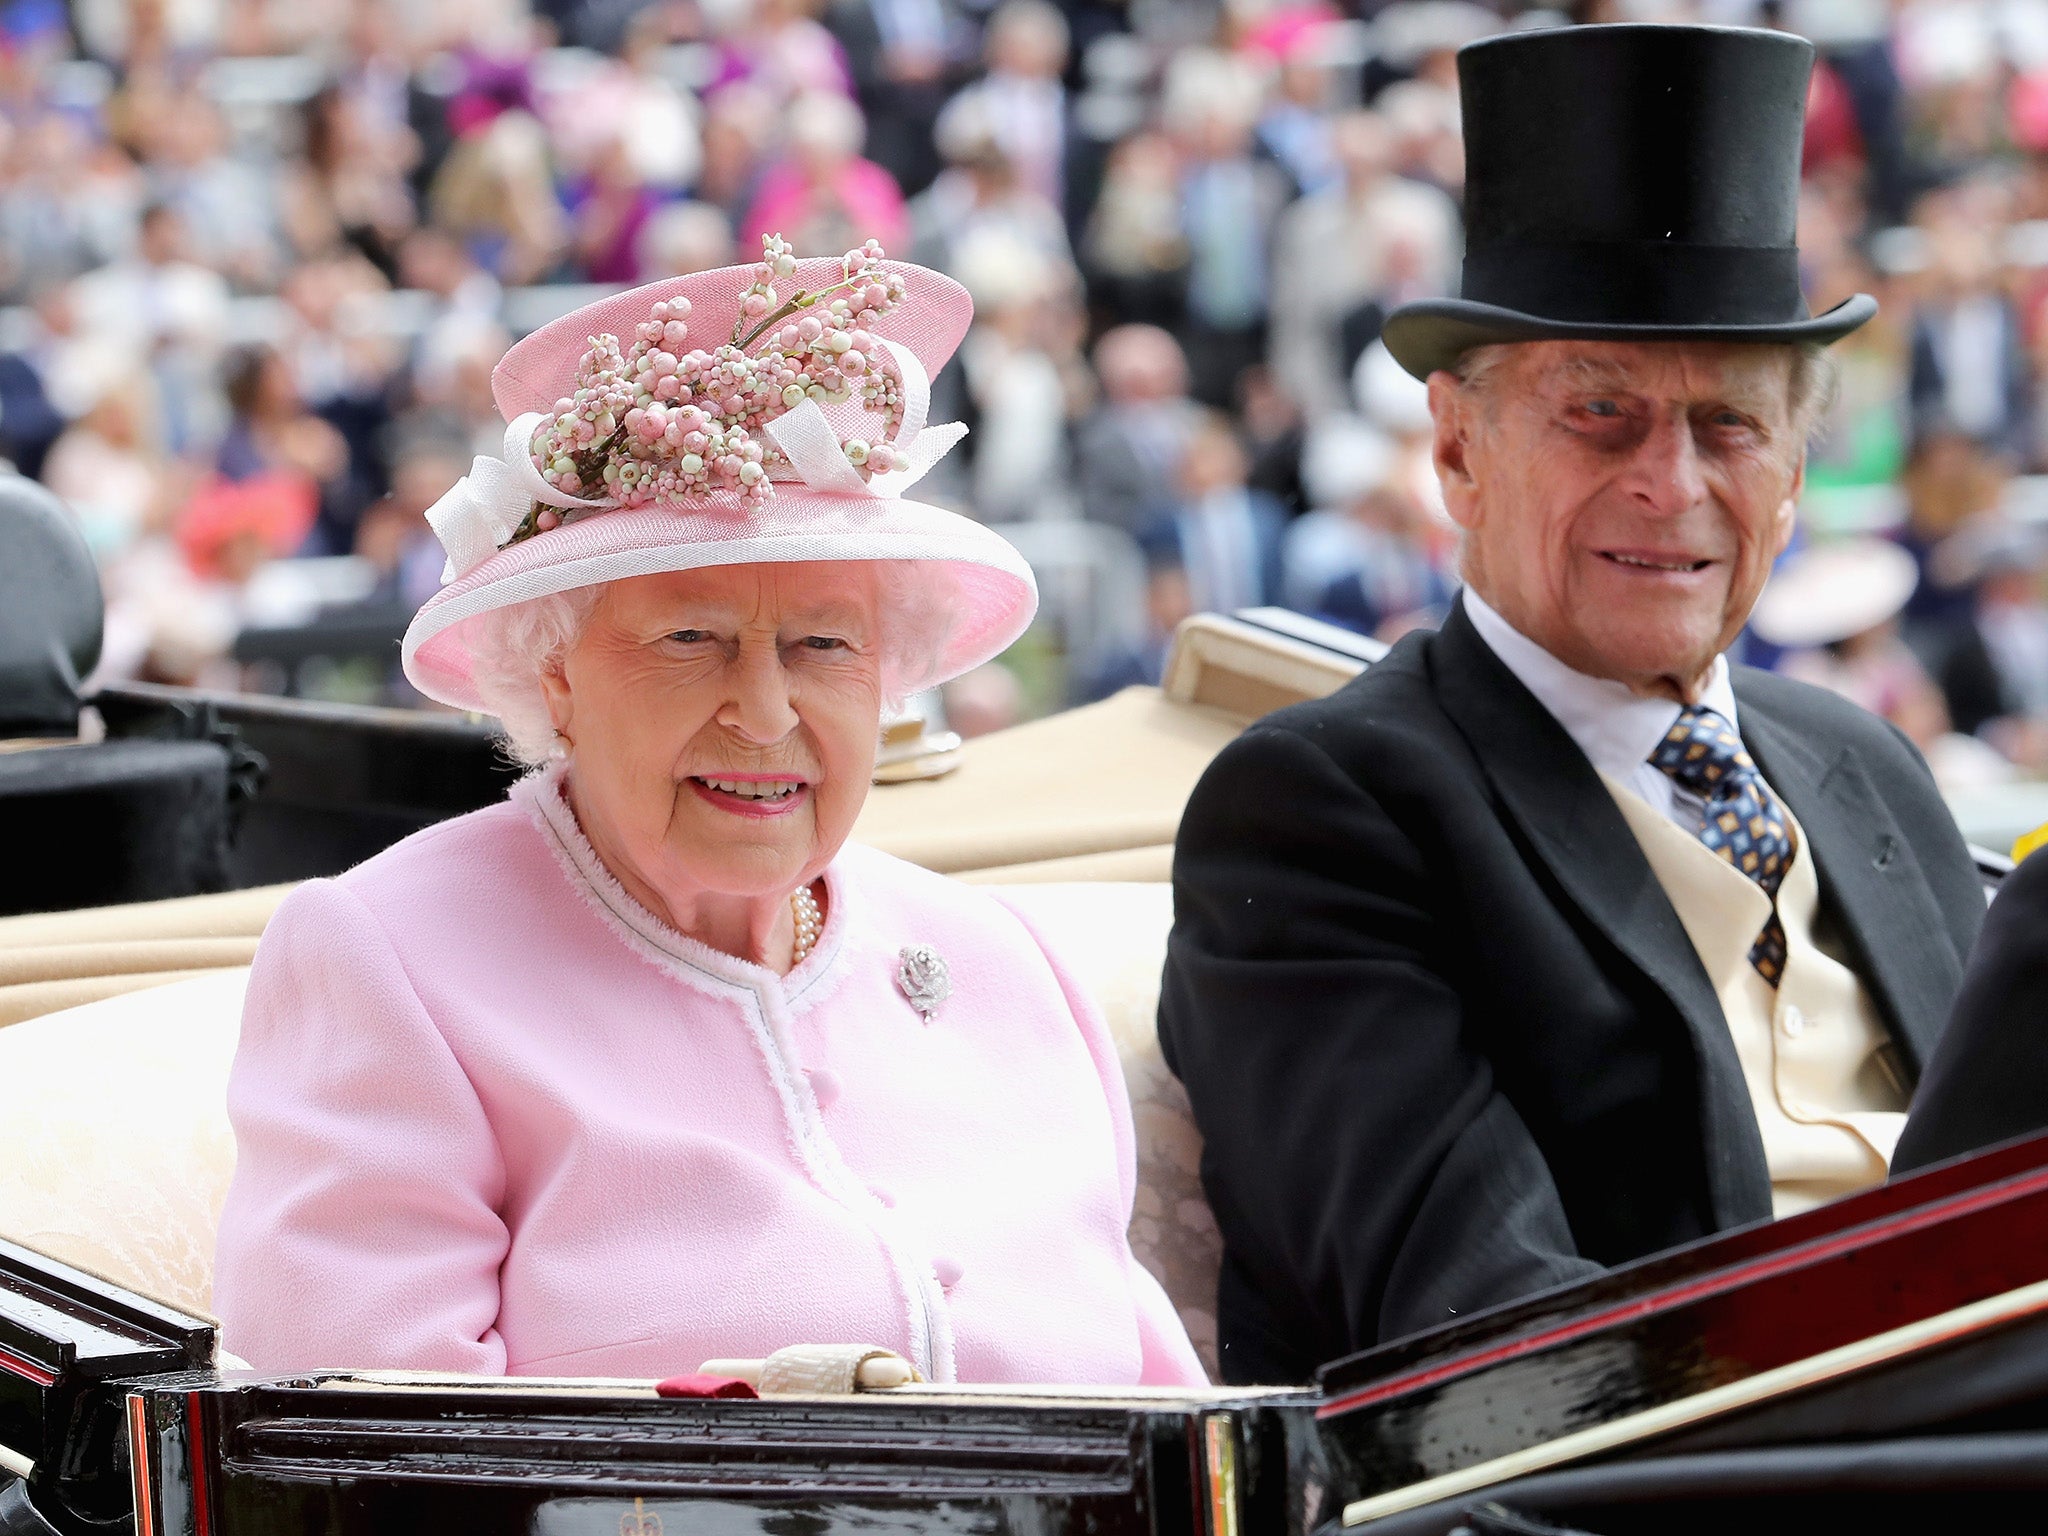 The Queen and Prince Philip at Royal Ascot, part of the Crown Estate